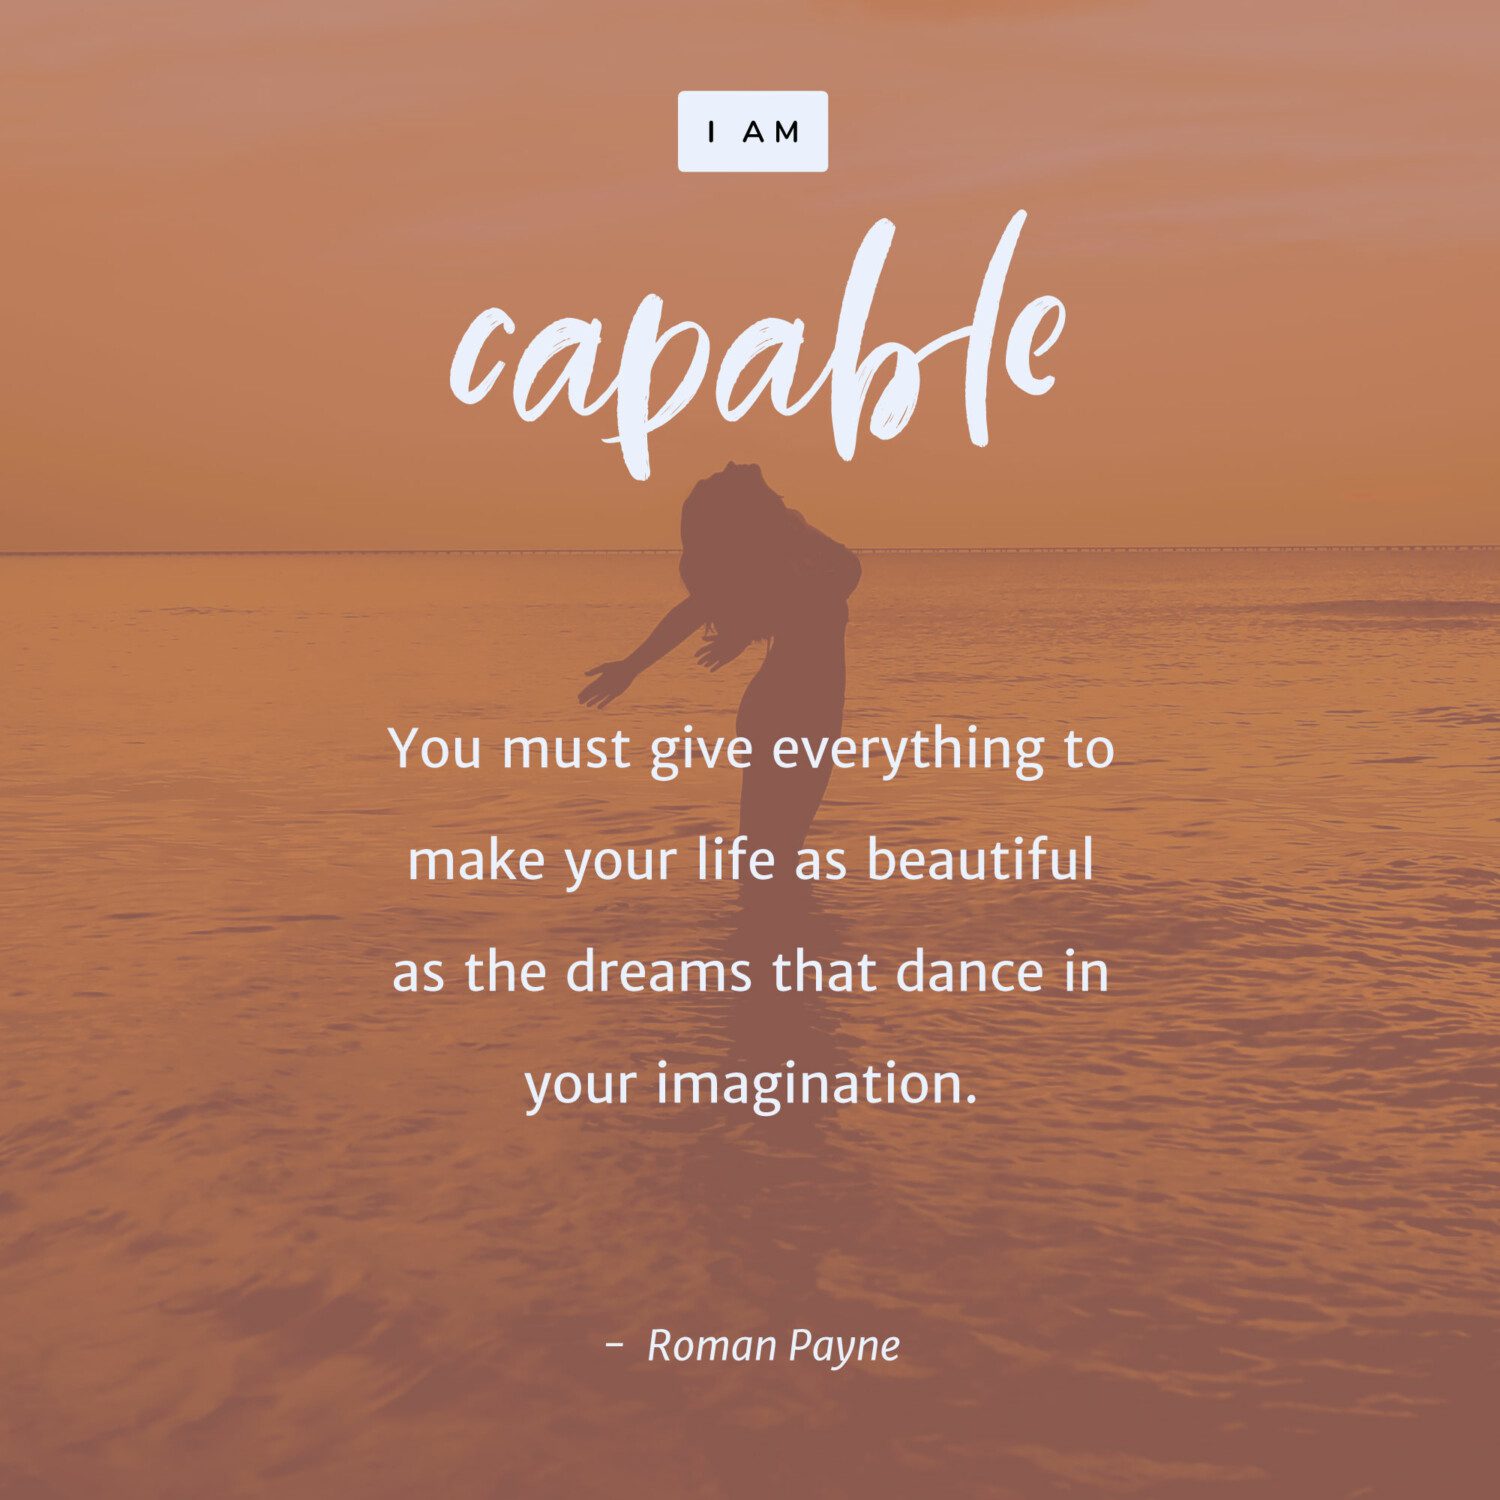 You must give everything to make your life as beautiful as the dreams that dance in your imagination. – Roman Payne